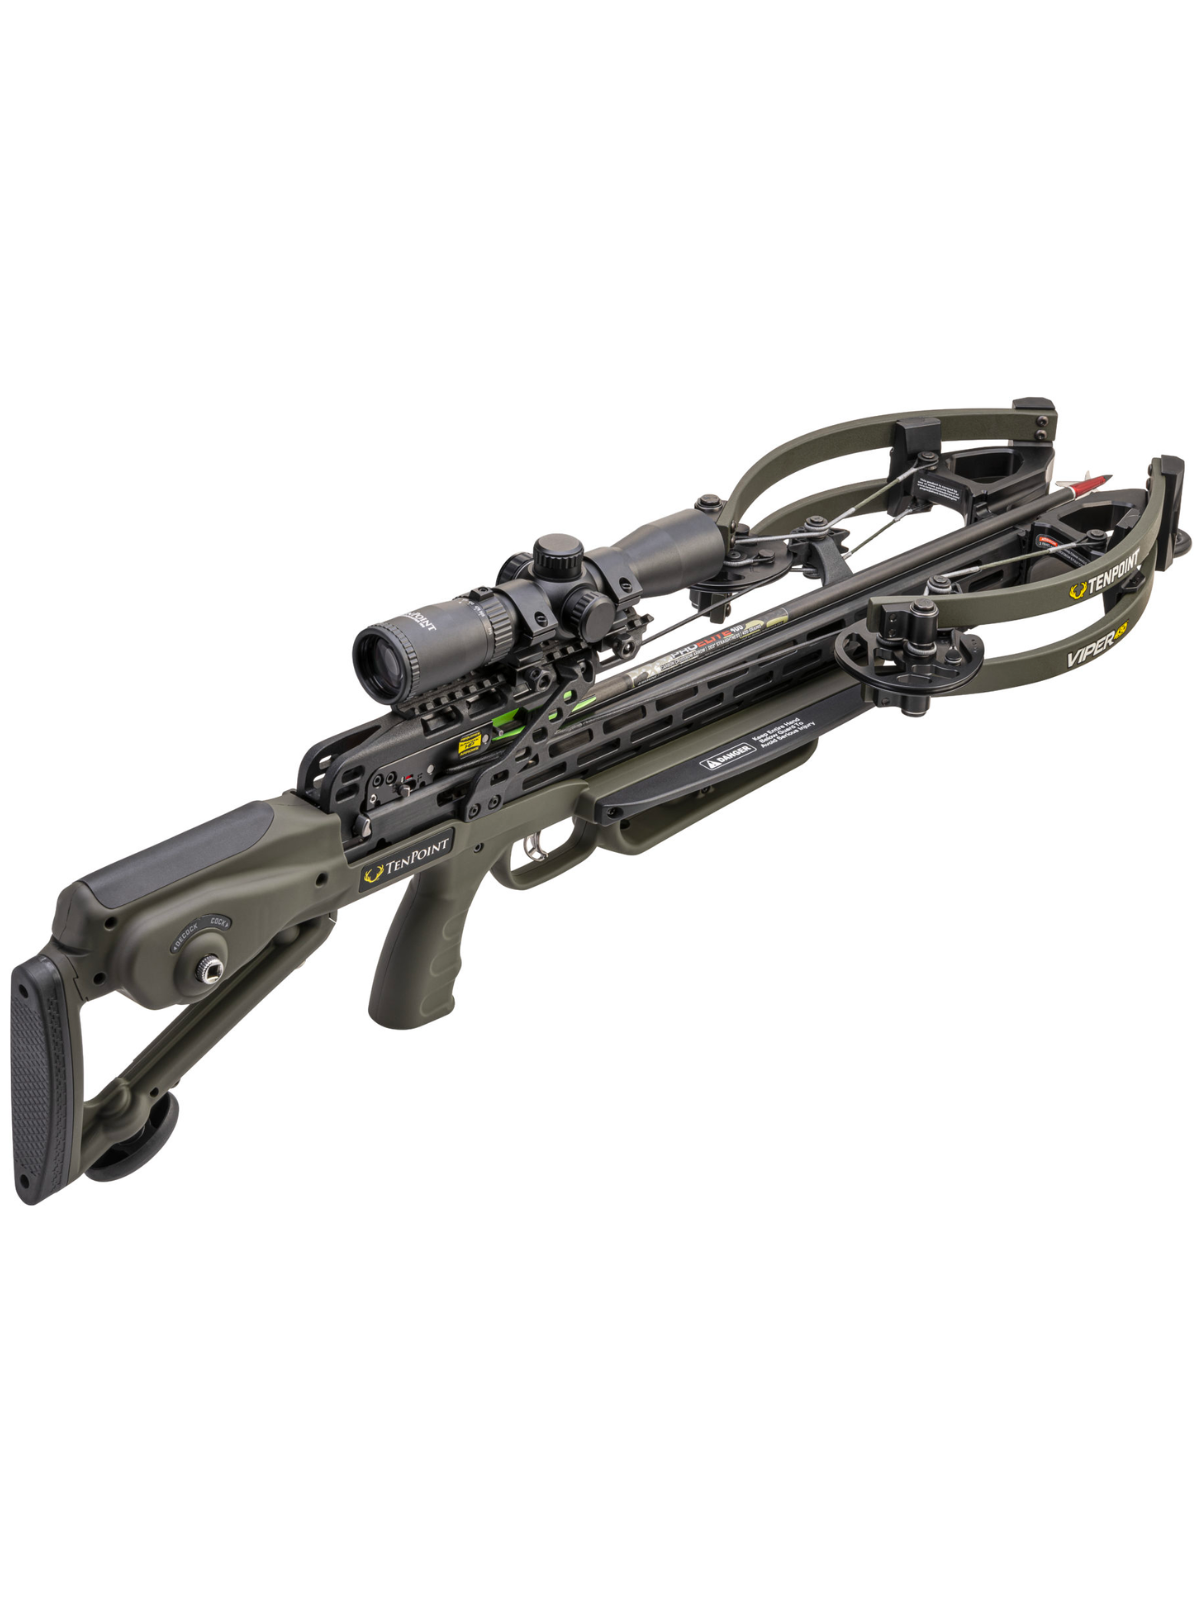 TenPoint Viper 430 Compound Crossbow Package